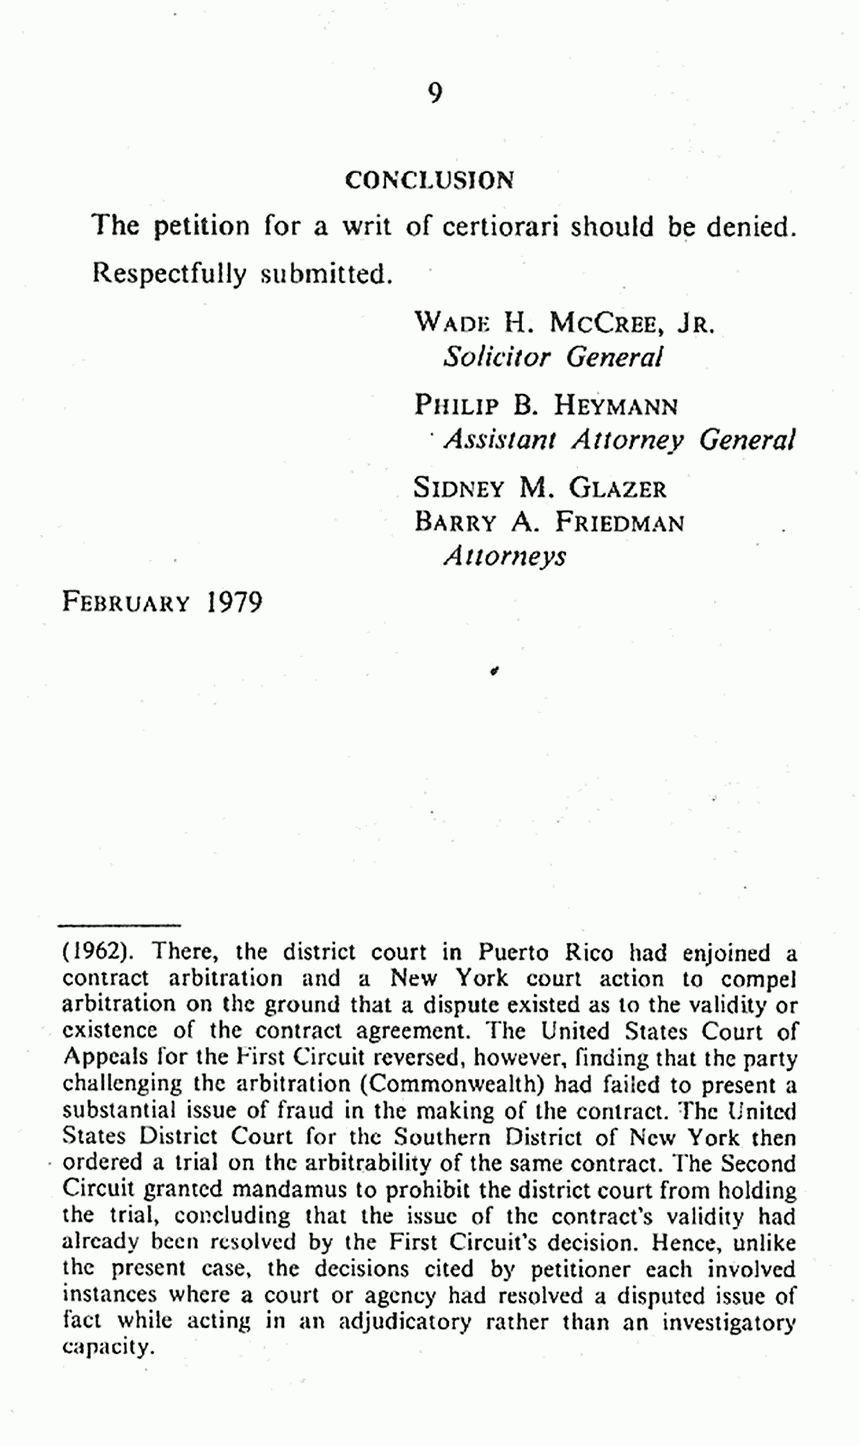 February 1979: Supreme Court of the United States, On Petition for Writ of Certiorari to the U. S. Court of Appeals for the 4th Circuit: Brief for the United States in Opposition, p. 9 of 9